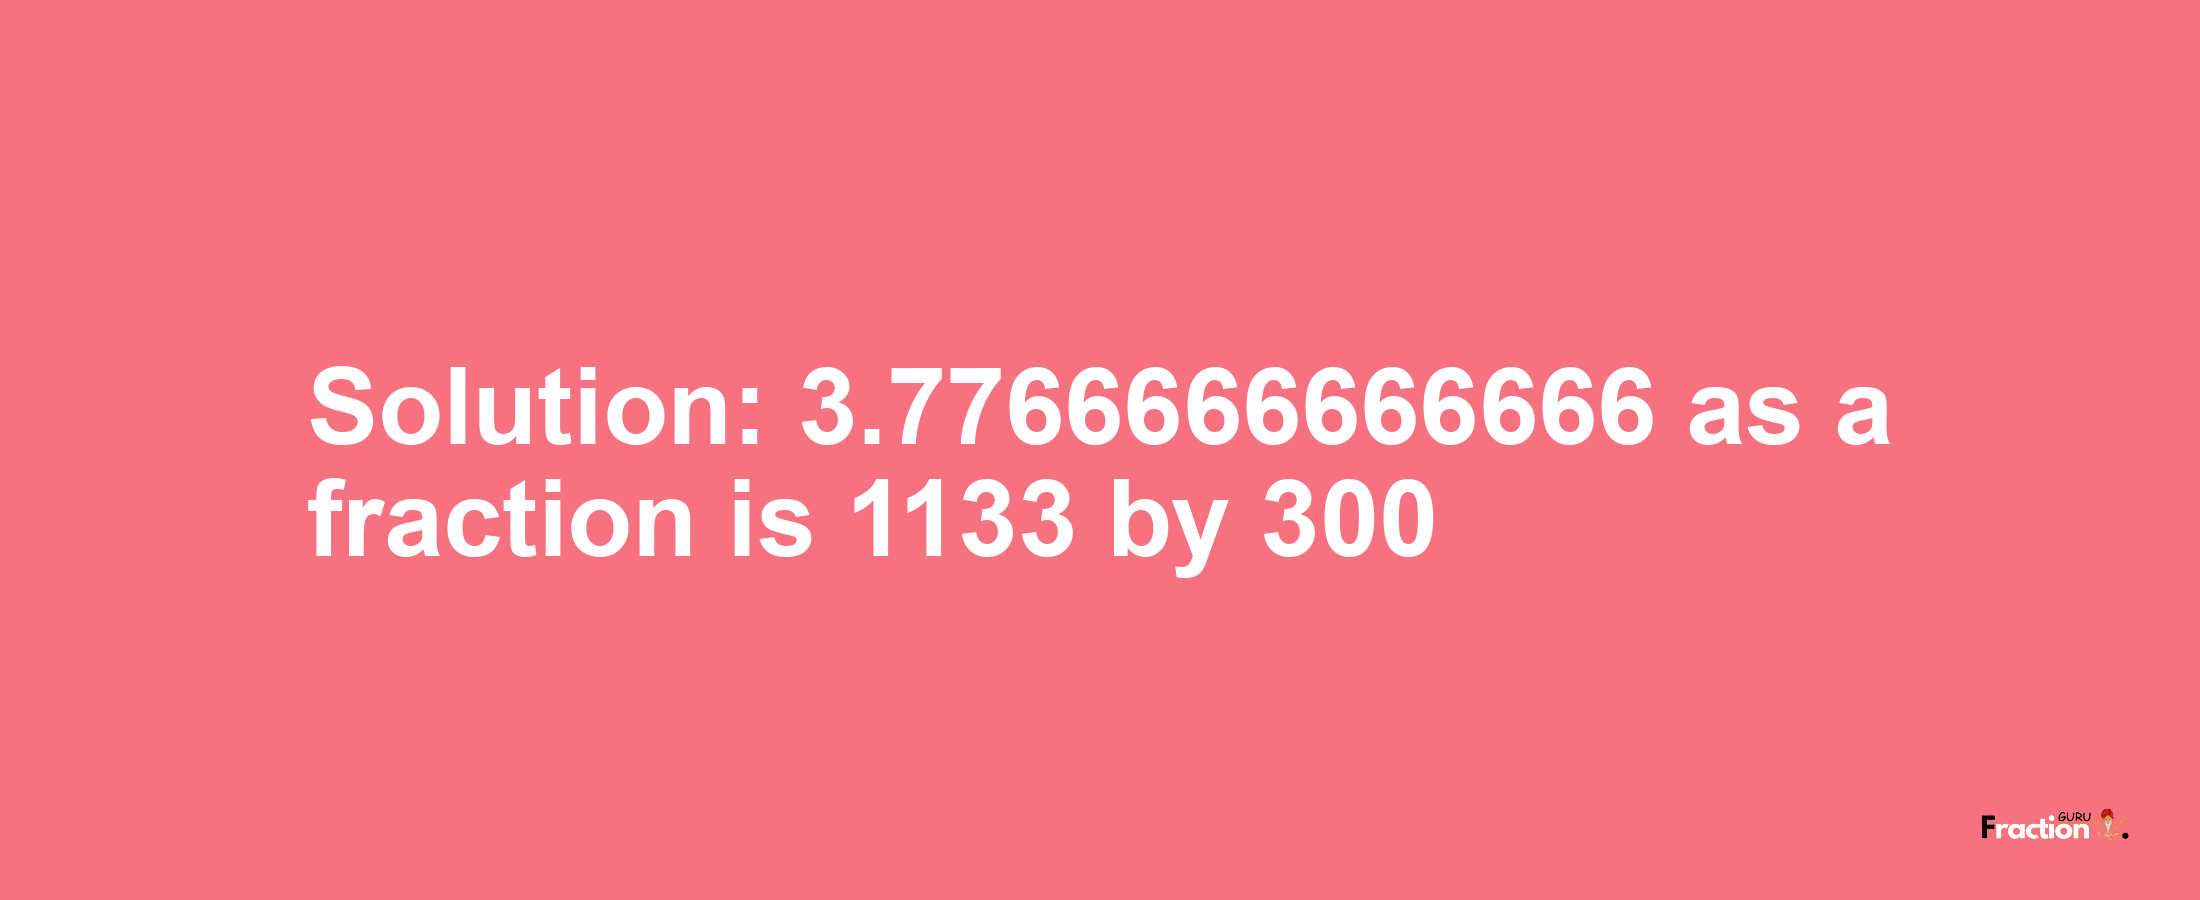 Solution:3.7766666666666 as a fraction is 1133/300